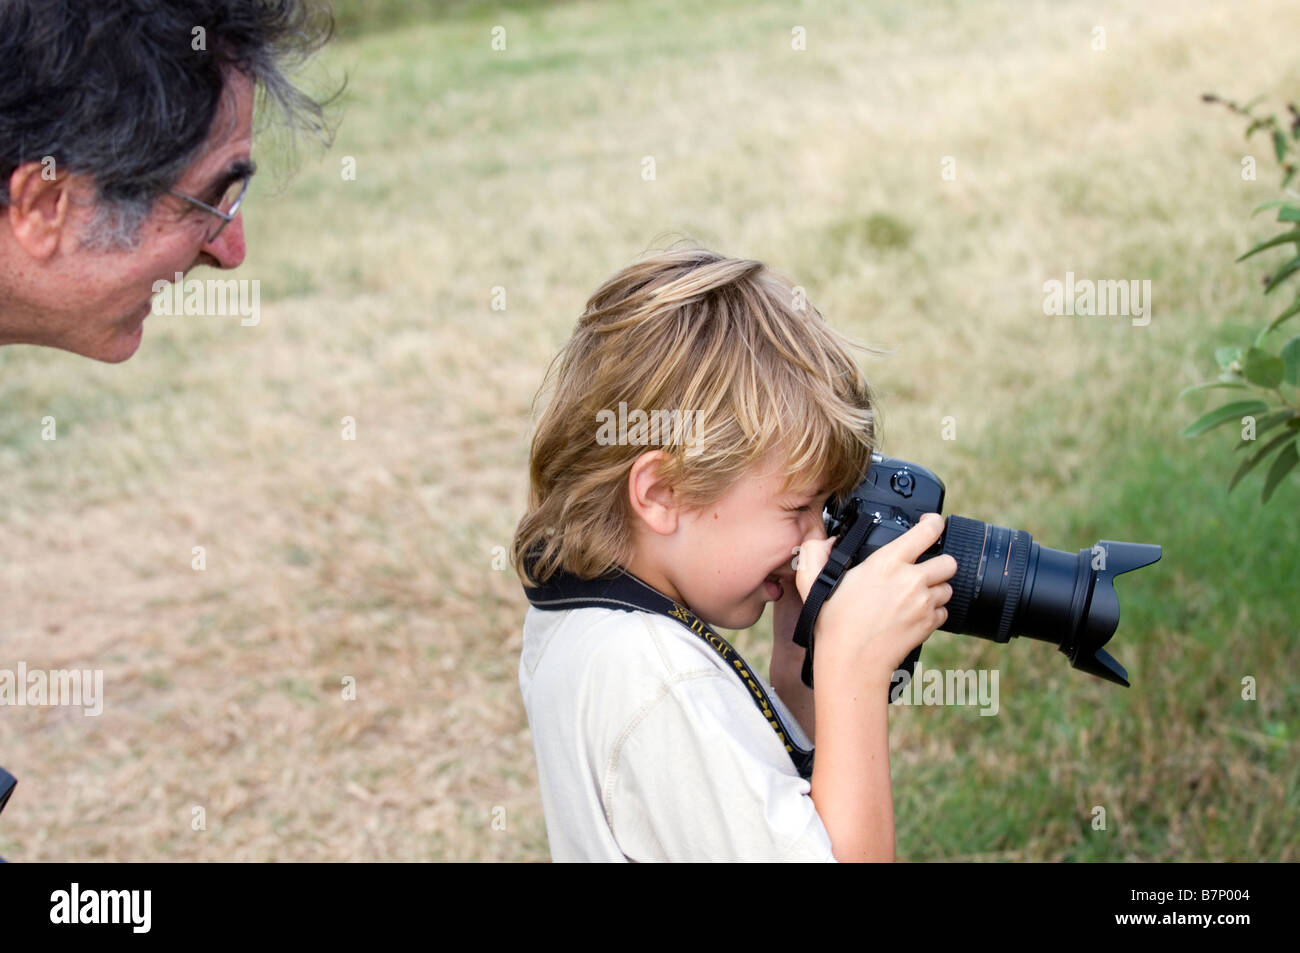 Young boy receiving photography lessons Stock Photo